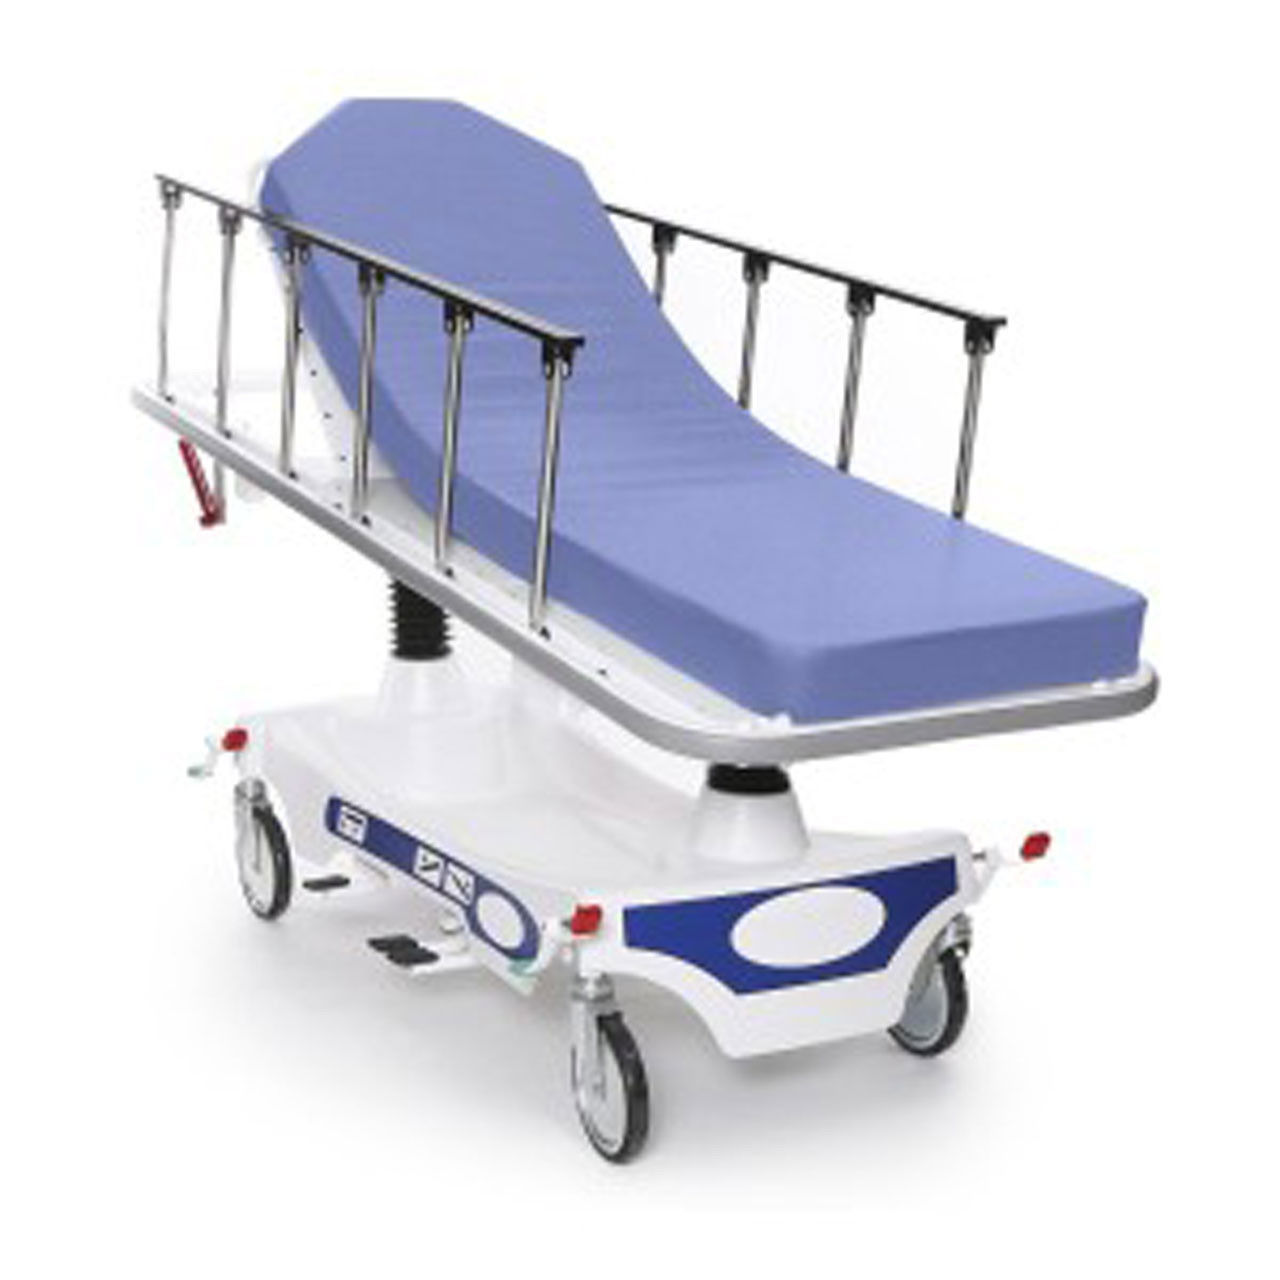 What materials are used for Fitted Stretcher Sheets and ambulance sheets?